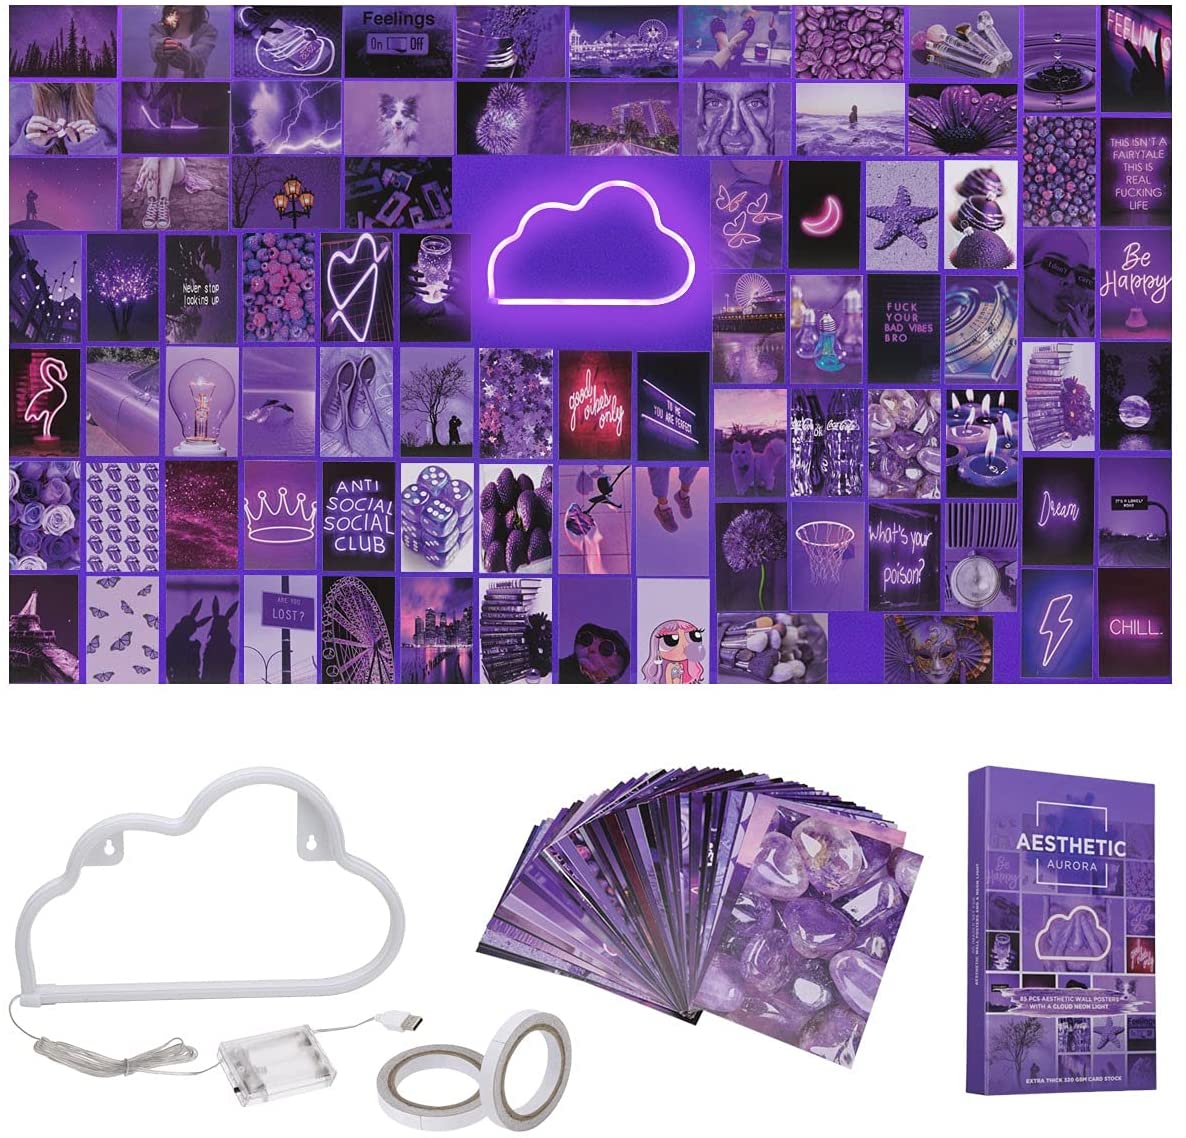 Buy AESTHETIC AURORA 85 PCS 4x6 Photo Wall Collage Kit, Aesthetic Posters & Cloud LED Lights For Bedroom, Picture Collage Kit For Wall Aesthetic Indie Room Decor & Neon signs, Double Sided